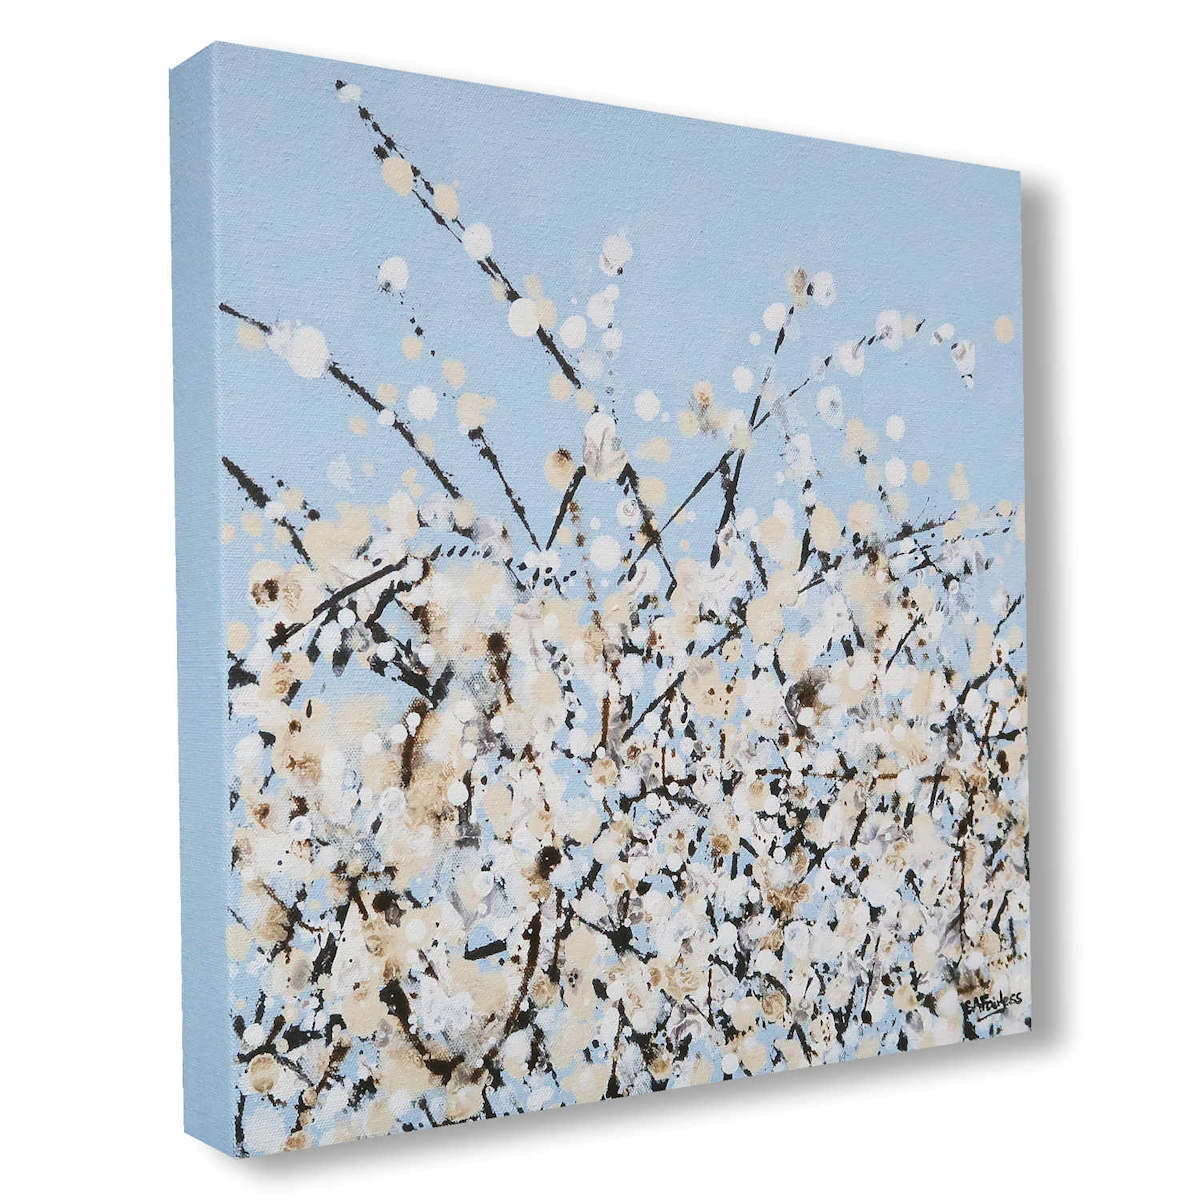 Spring blossom painting